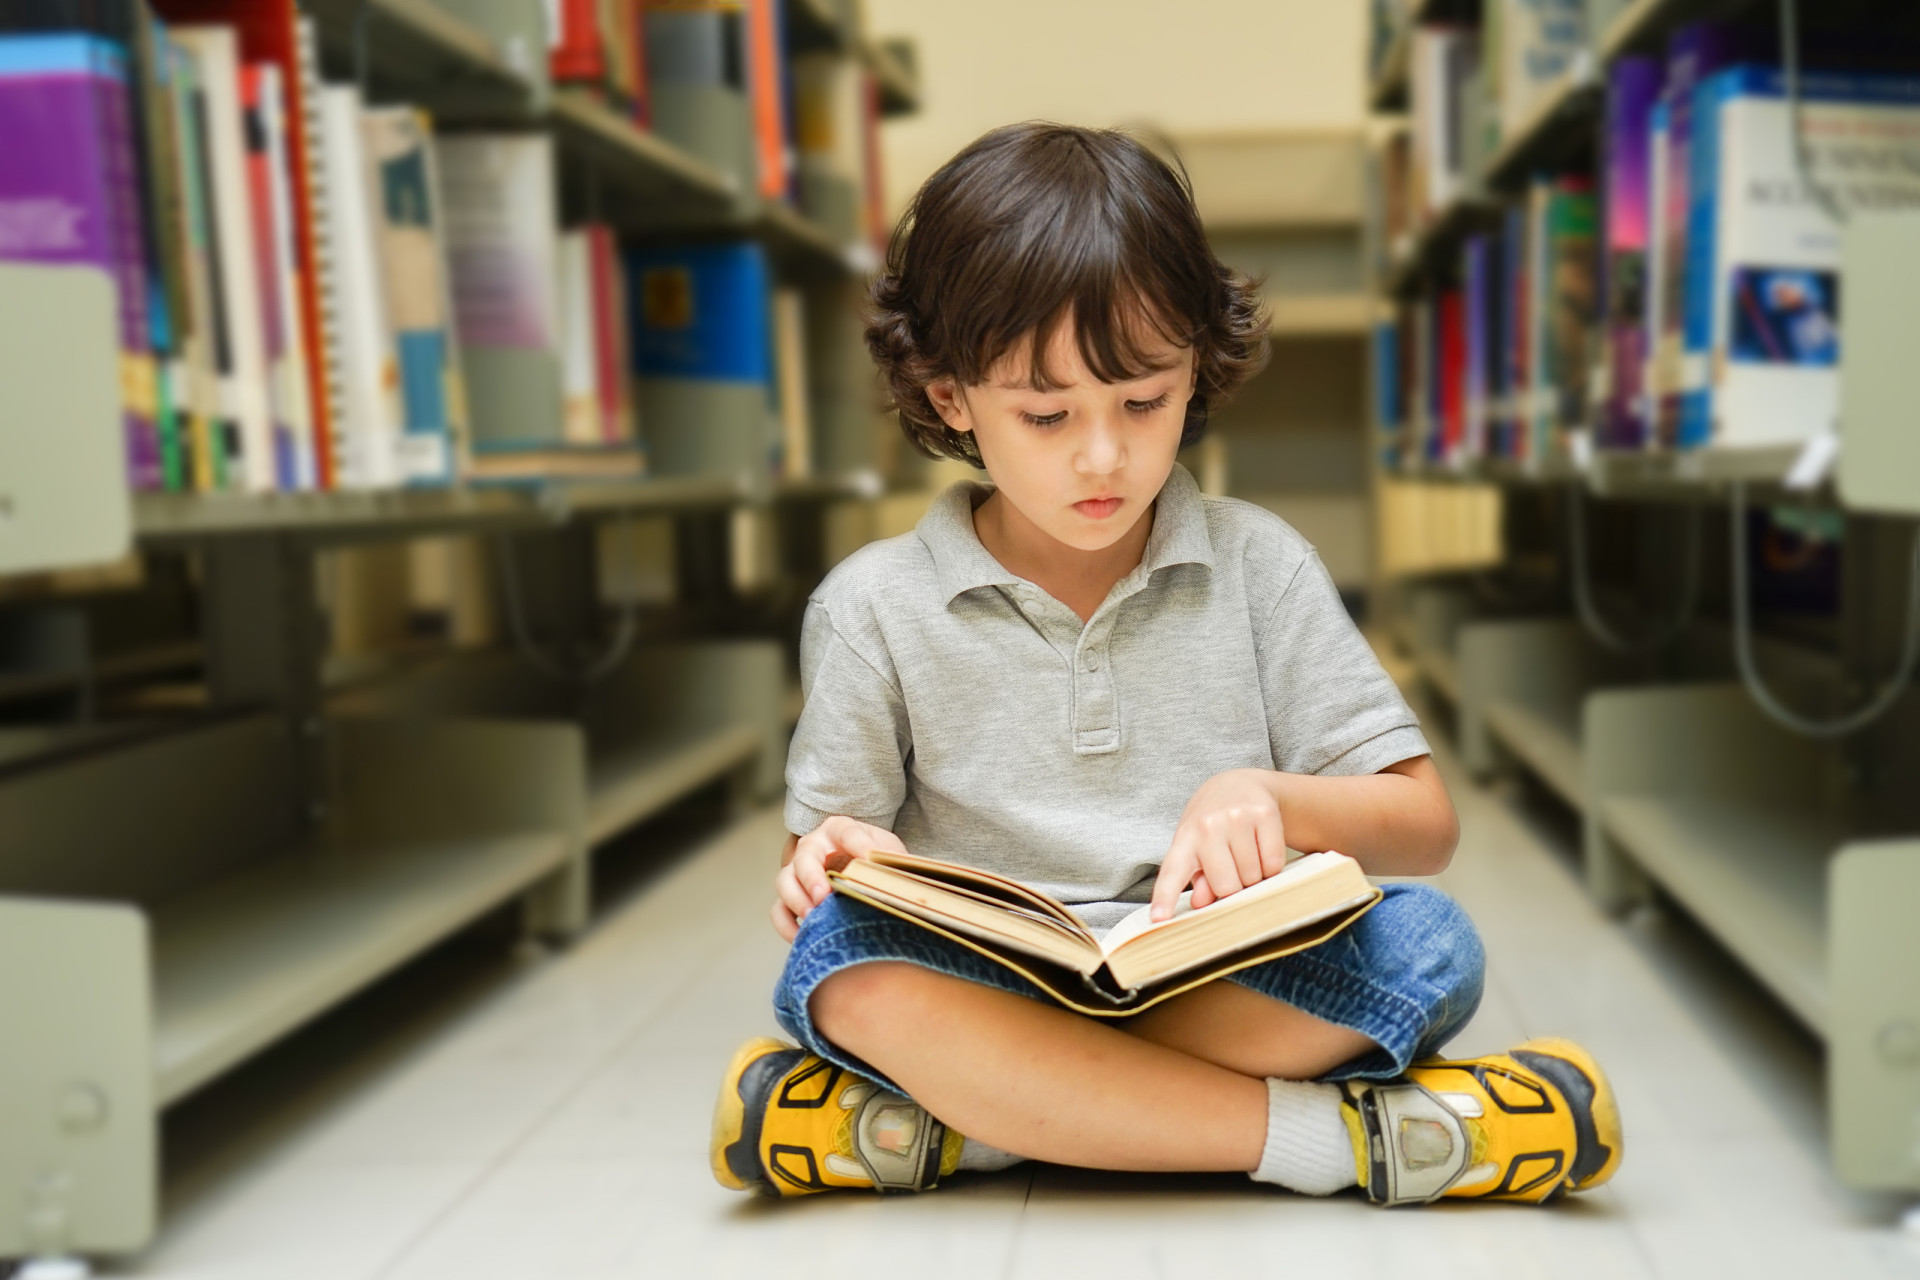 <p>Teaching children to be quiet in libraries instills respect for shared spaces and the importance of maintaining a peaceful atmosphere for everyone.</p><p><a href="https://www.msn.com/en-us/community/channel/vid-7xx8mnucu55yw63we9va2gwr7uihbxwc68fxqp25x6tg4ftibpra?cvid=94631541bc0f4f89bfd59158d696ad7e">Follow us and access great exclusive content every day</a></p>